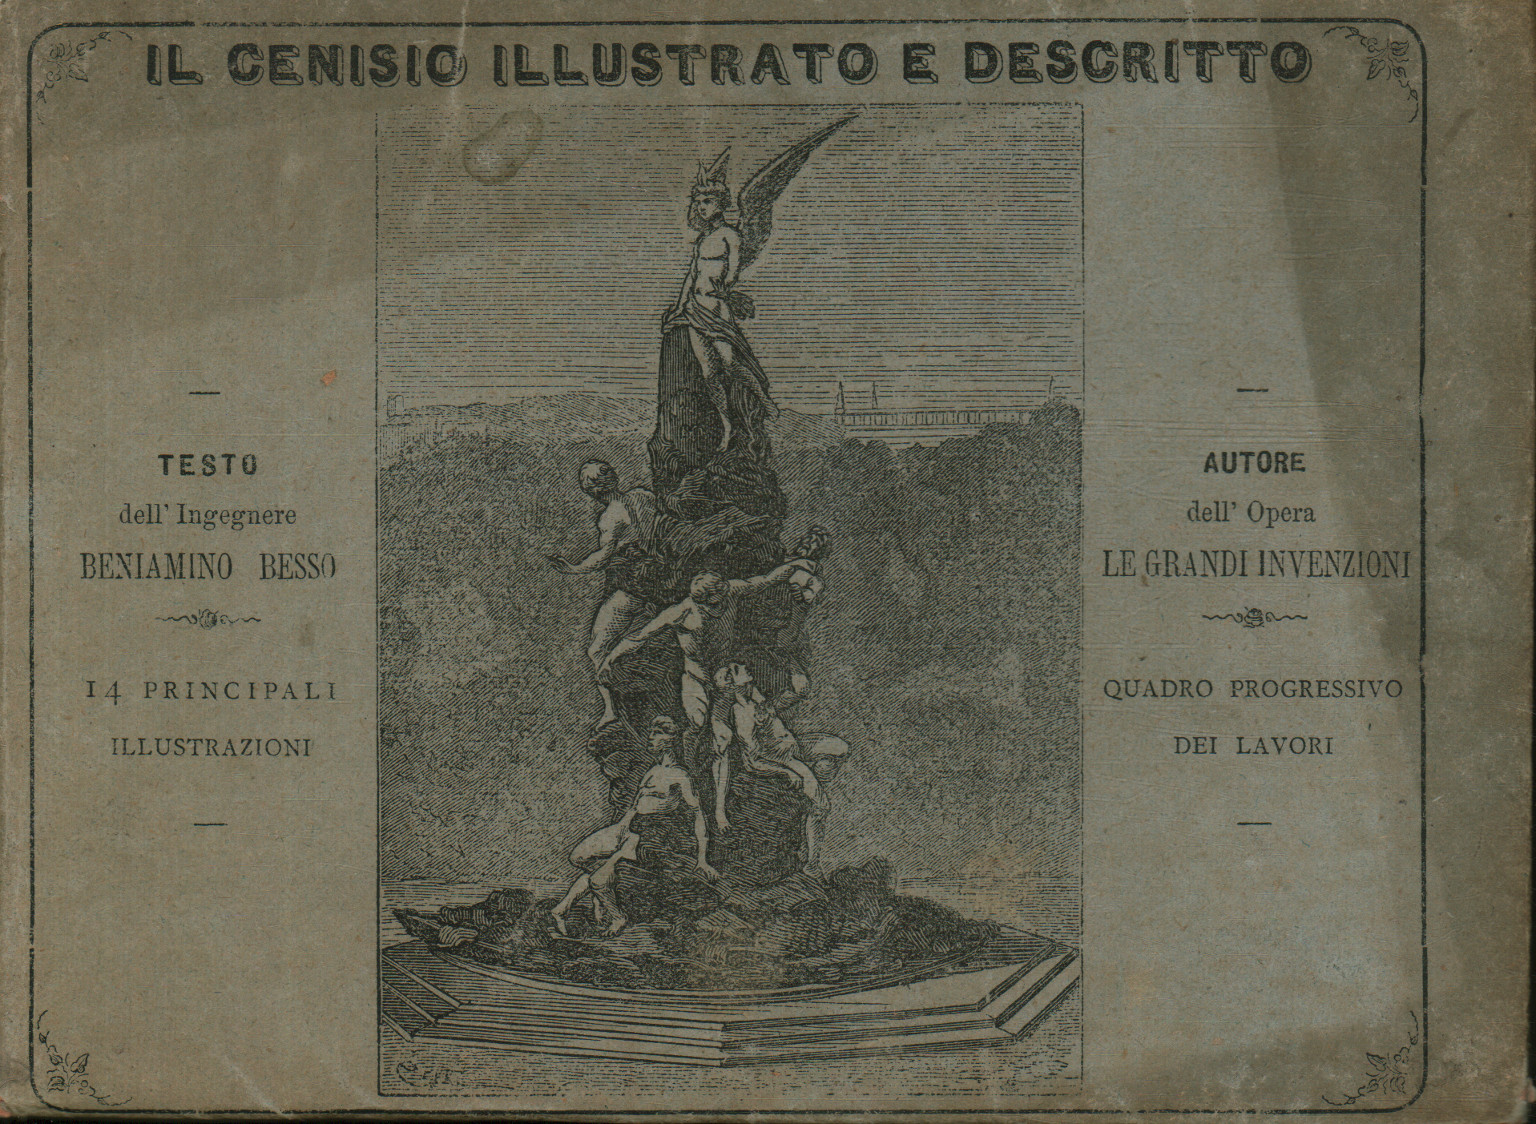 The Cenisio illustrated and described